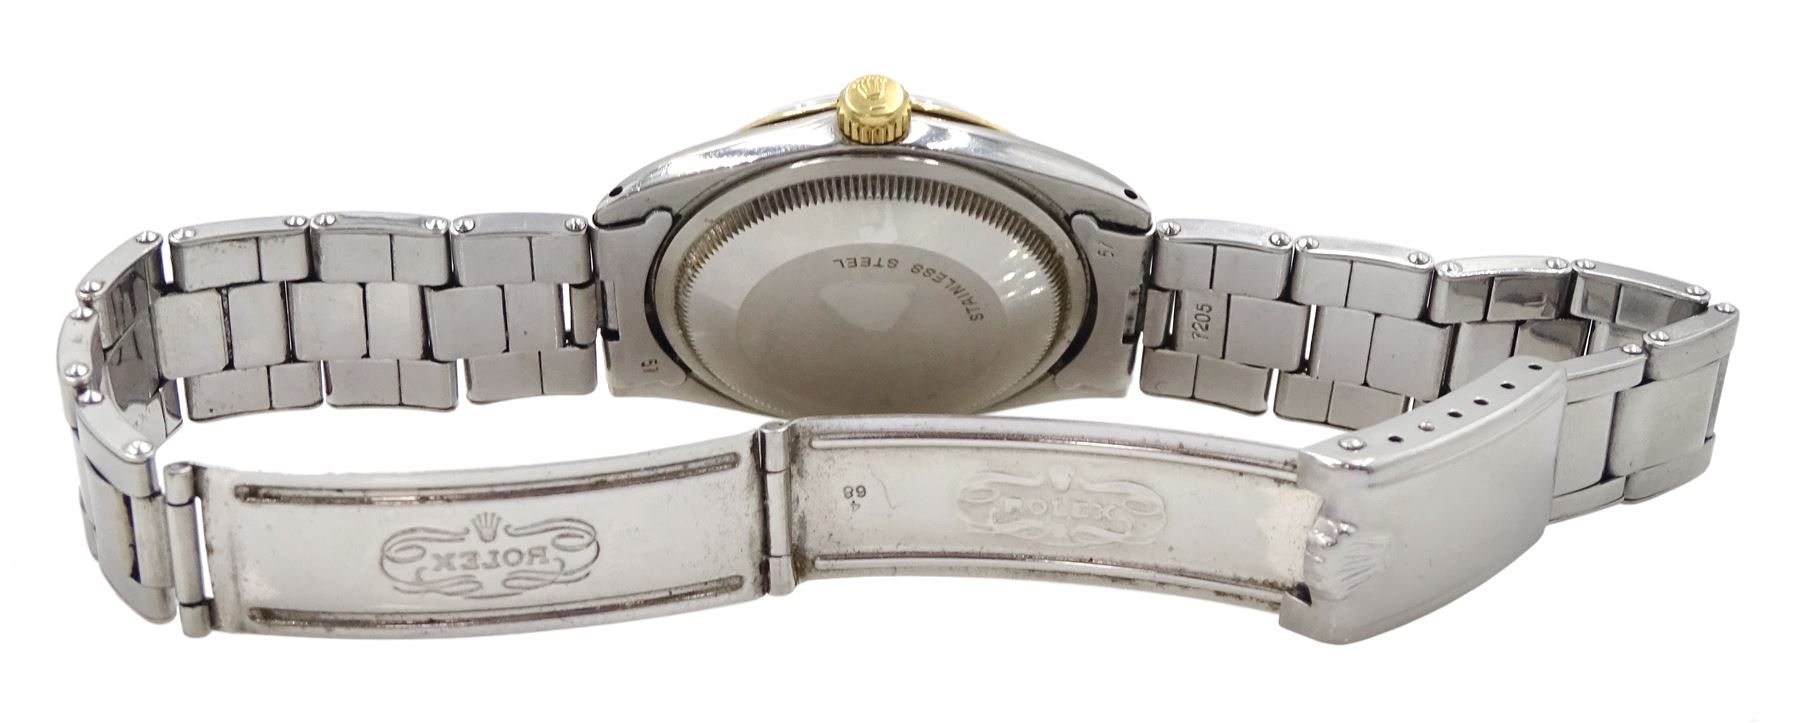 Rolex Oyster Perpetual Zephyr gentleman's gold and stainless steel wristwatch - Image 3 of 8